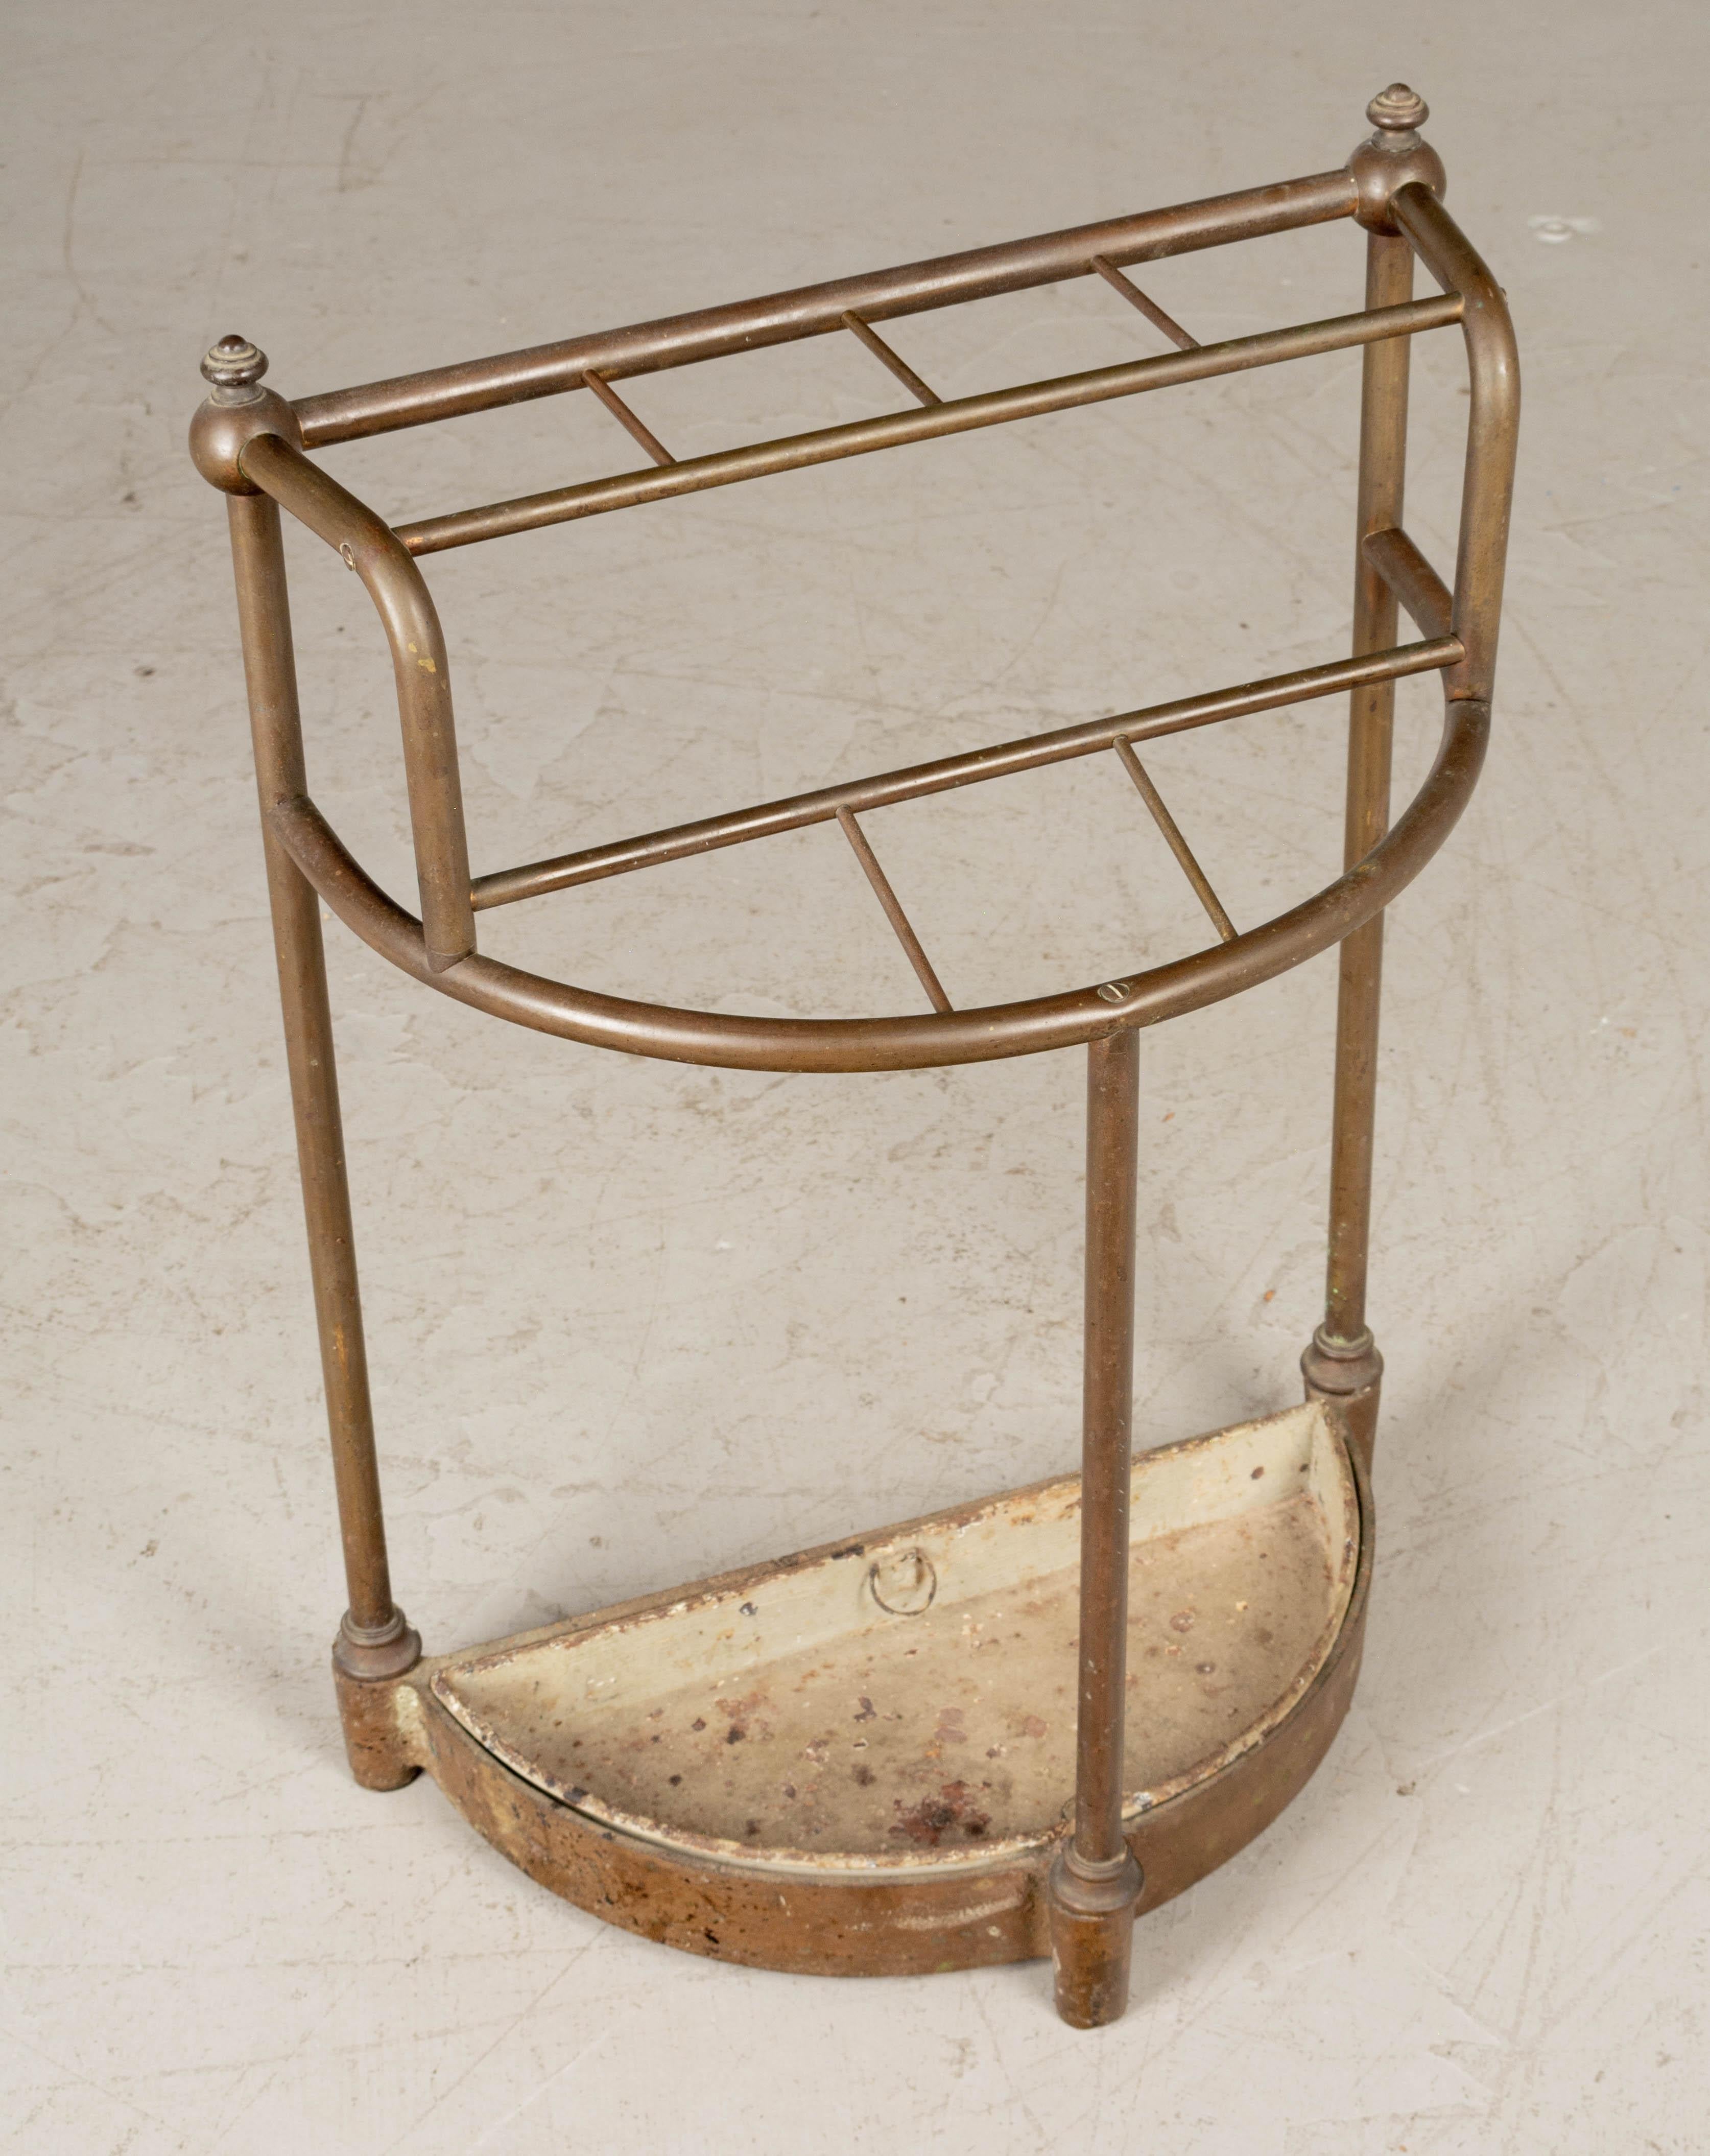 A 19th century French brass and cast iron umbrella stand. Demilune form with brass tubing and decorative finials. Cast iron base with removable drip tray. 
More photos available upon request. We have a large selection of French antiques. Please